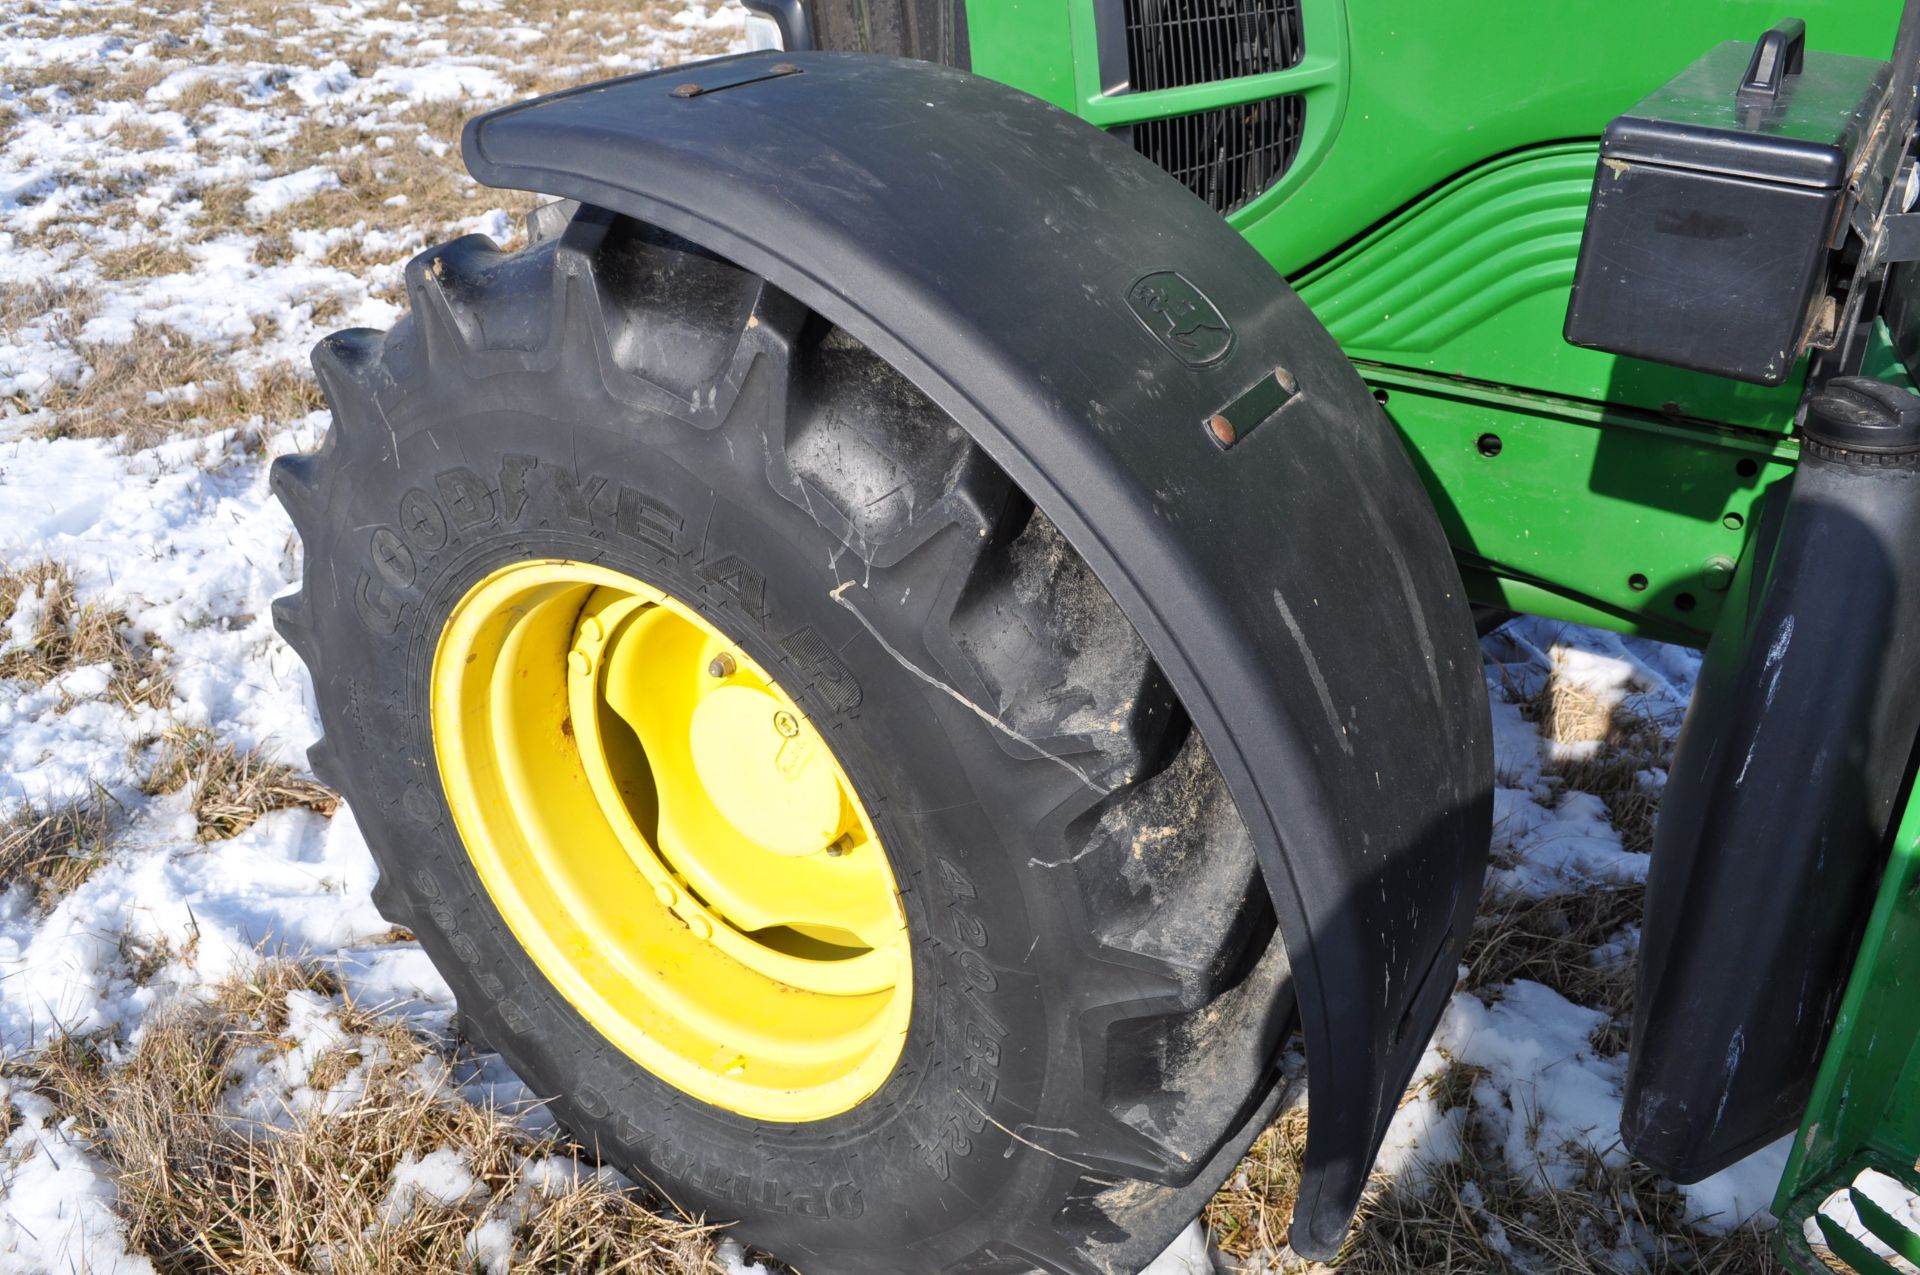 John Deere 6430 tractor, MFWD, C/H/A, 6x4 trans, 460/85R38 rear, 420/85R24 front, front fenders, - Image 15 of 36